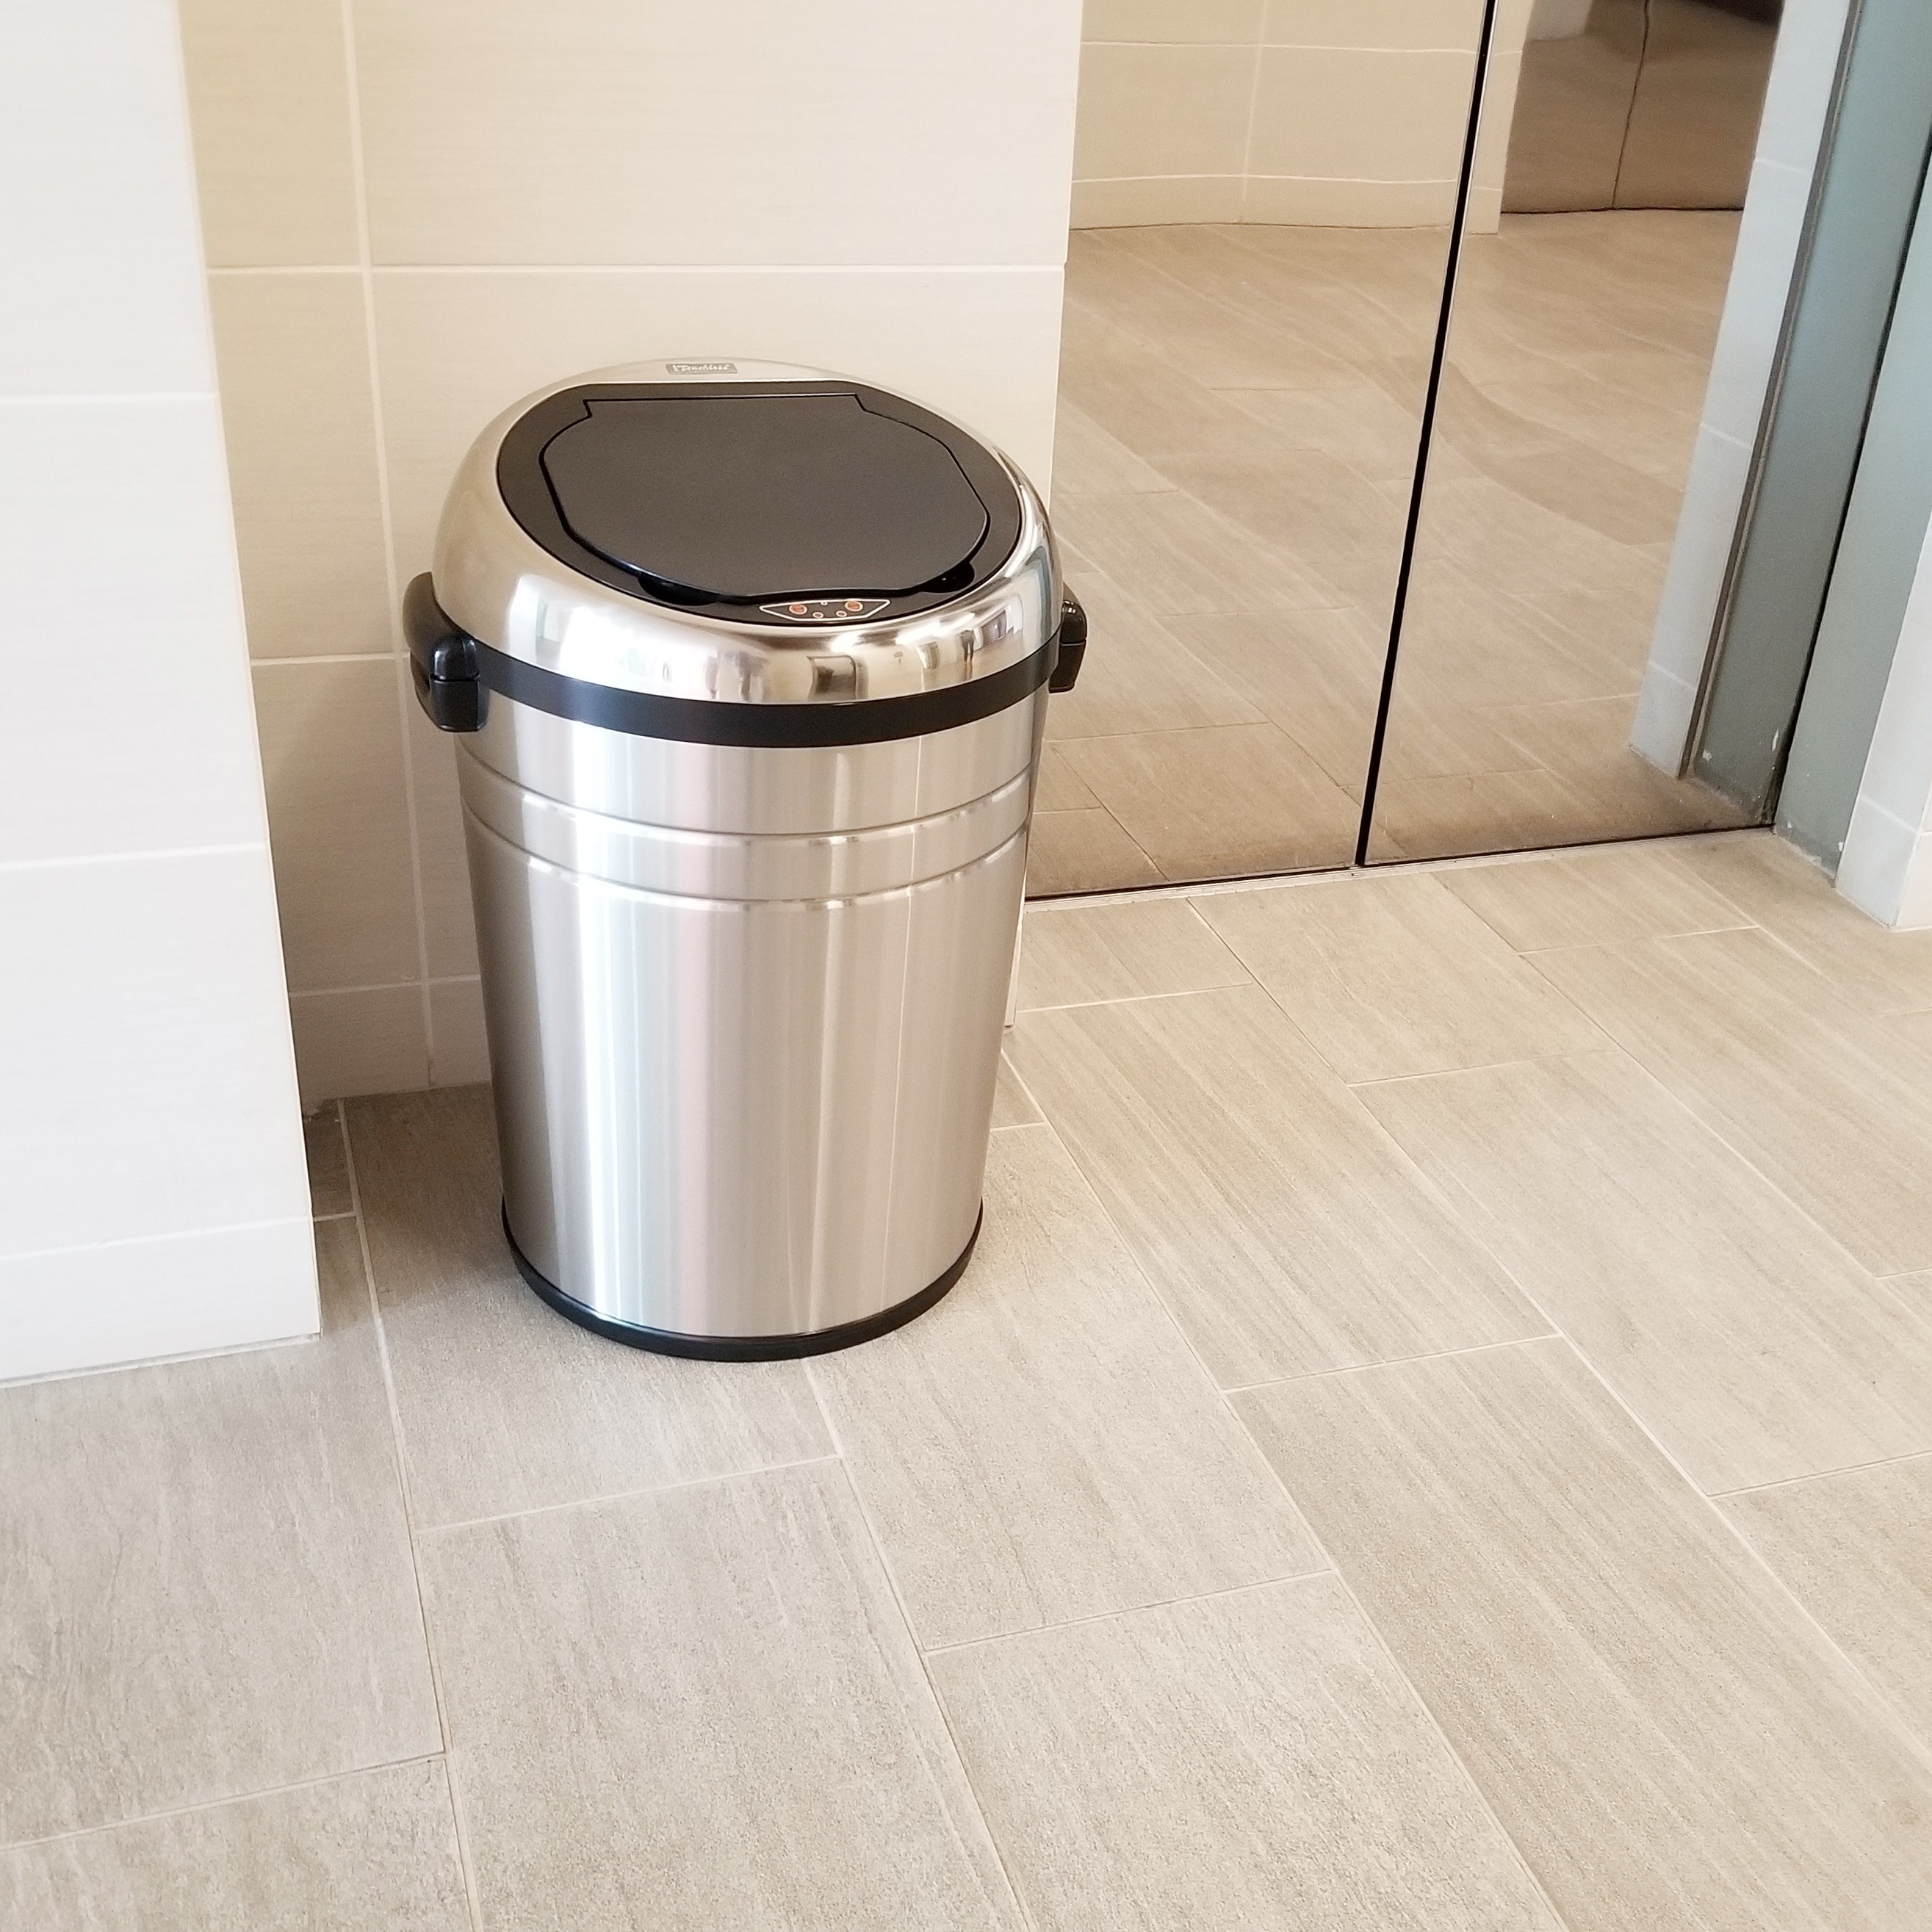 https://ak1.ostkcdn.com/images/products/2604844/iTouchless-23-Gal.-Stainless-Steel-Motion-Sensing-Touchless-Trash-Can-b4efb5b8-203b-4758-add3-41f4d56070c4.jpg